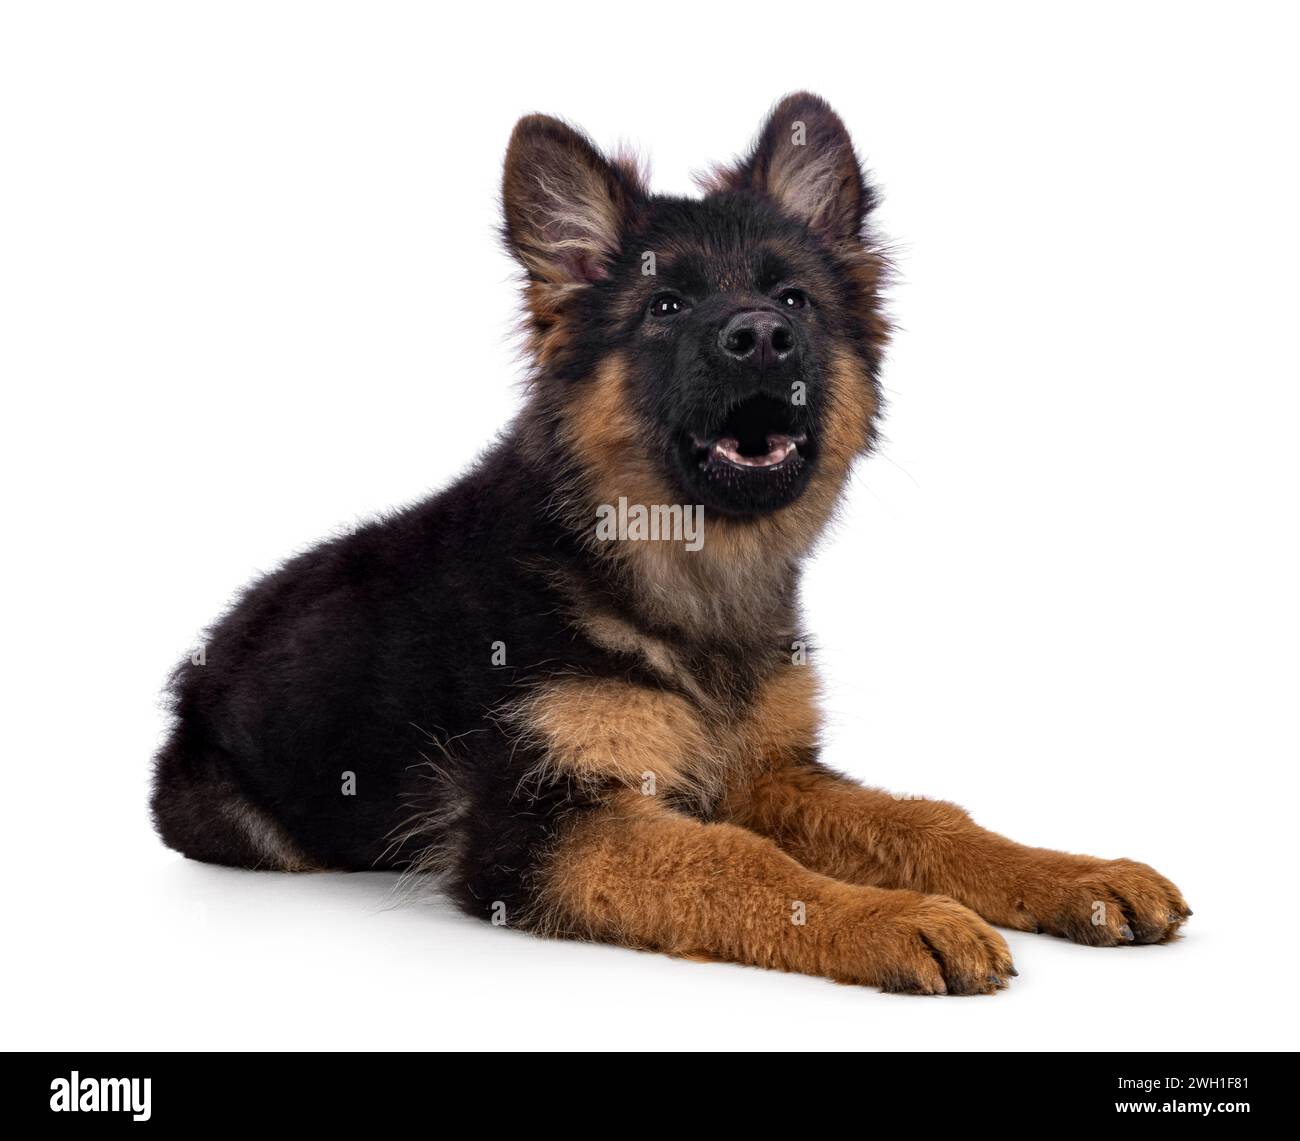 Cute German Shepherd dog puppy, laying down side ways. Looking straight to camera, mouth open howling. Isolated on a white background. Stock Photo